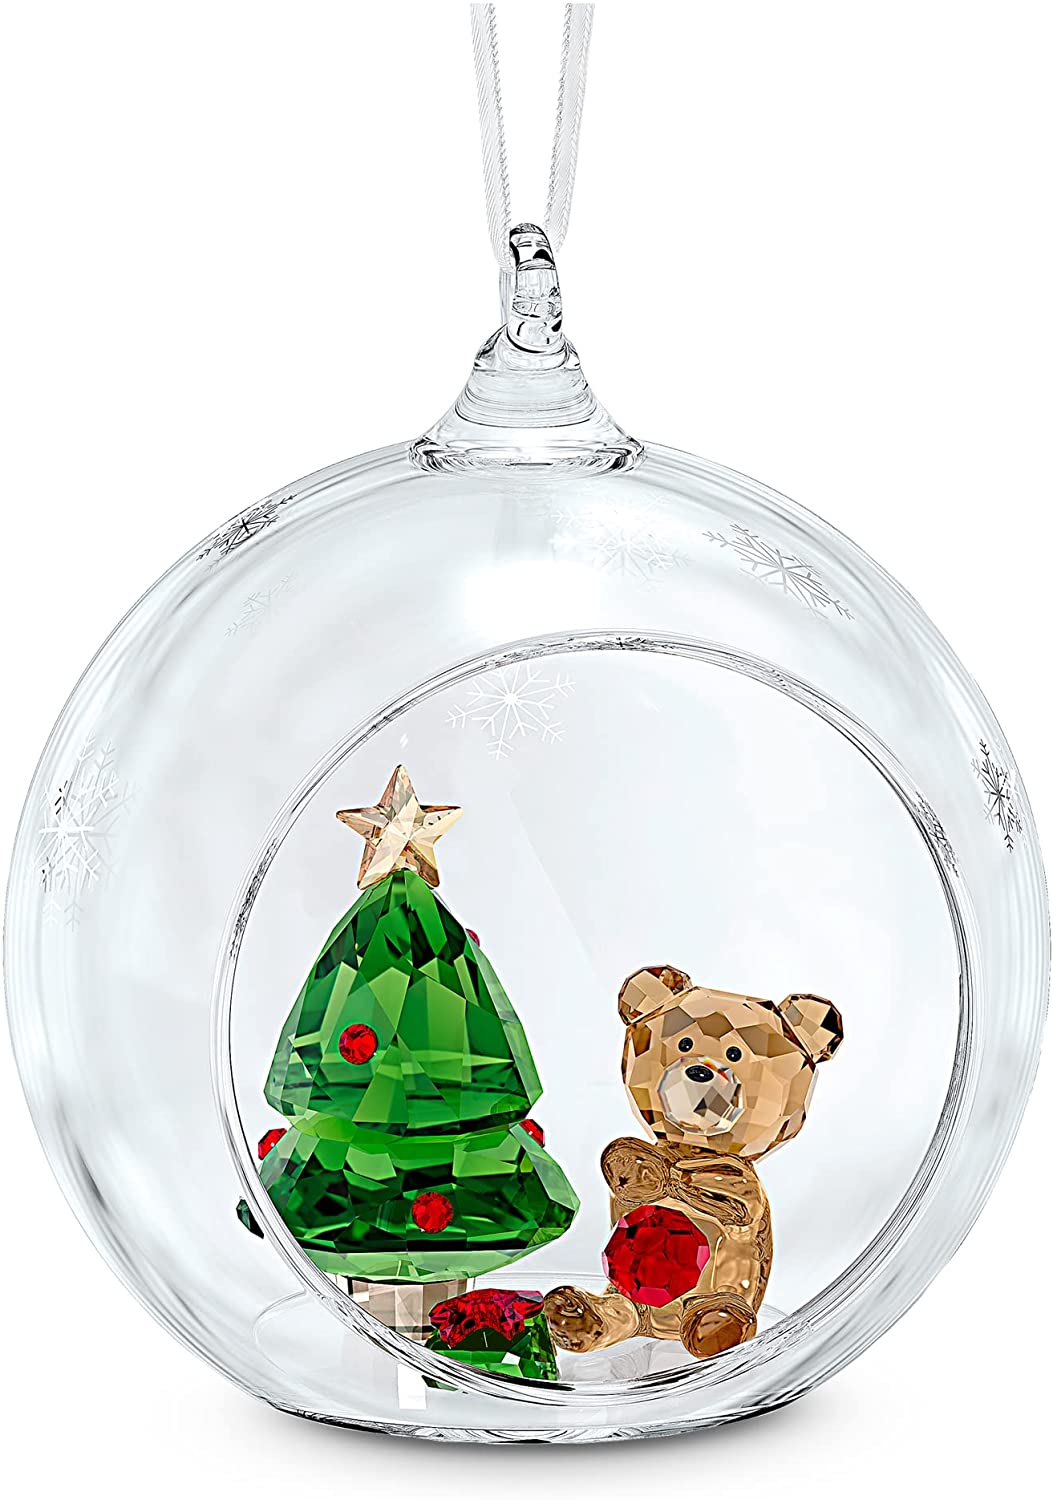 Swarovski Christmas Bauble, Christmas Scene Ornament with Magnificent Ribbon and Red and Green Swarovski Crystals